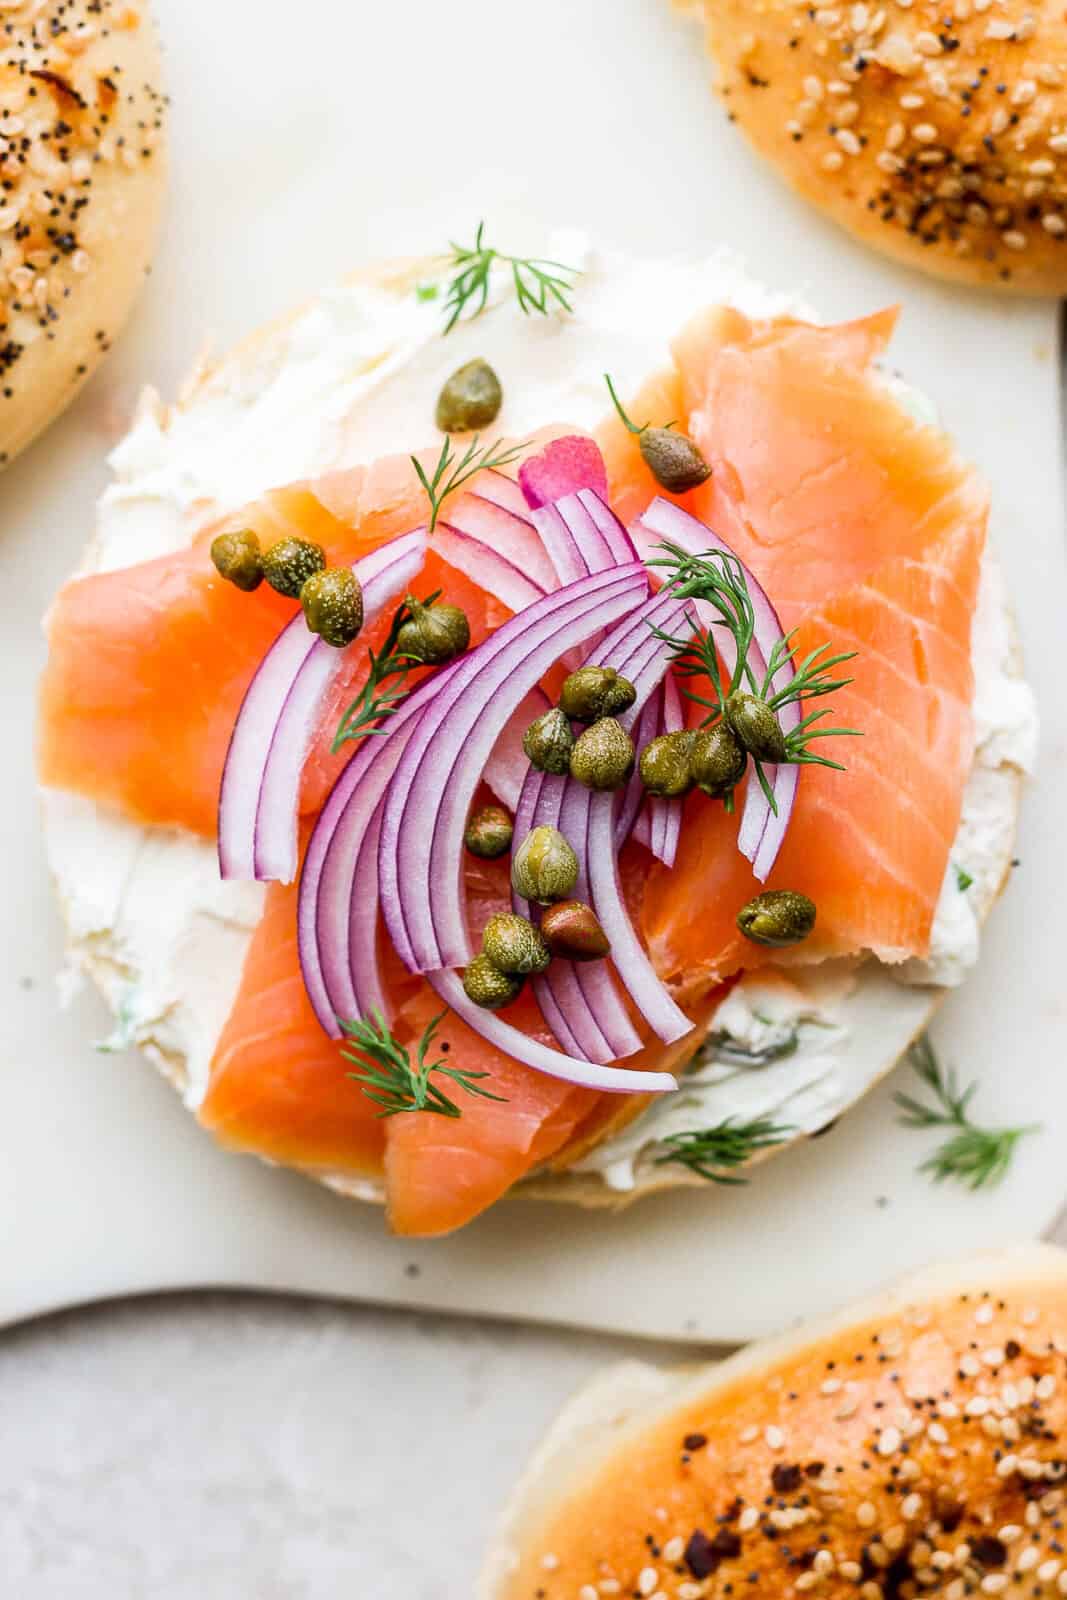 An everything bagel topped with cream cheese, lox, red onion, capers, and fresh dill.